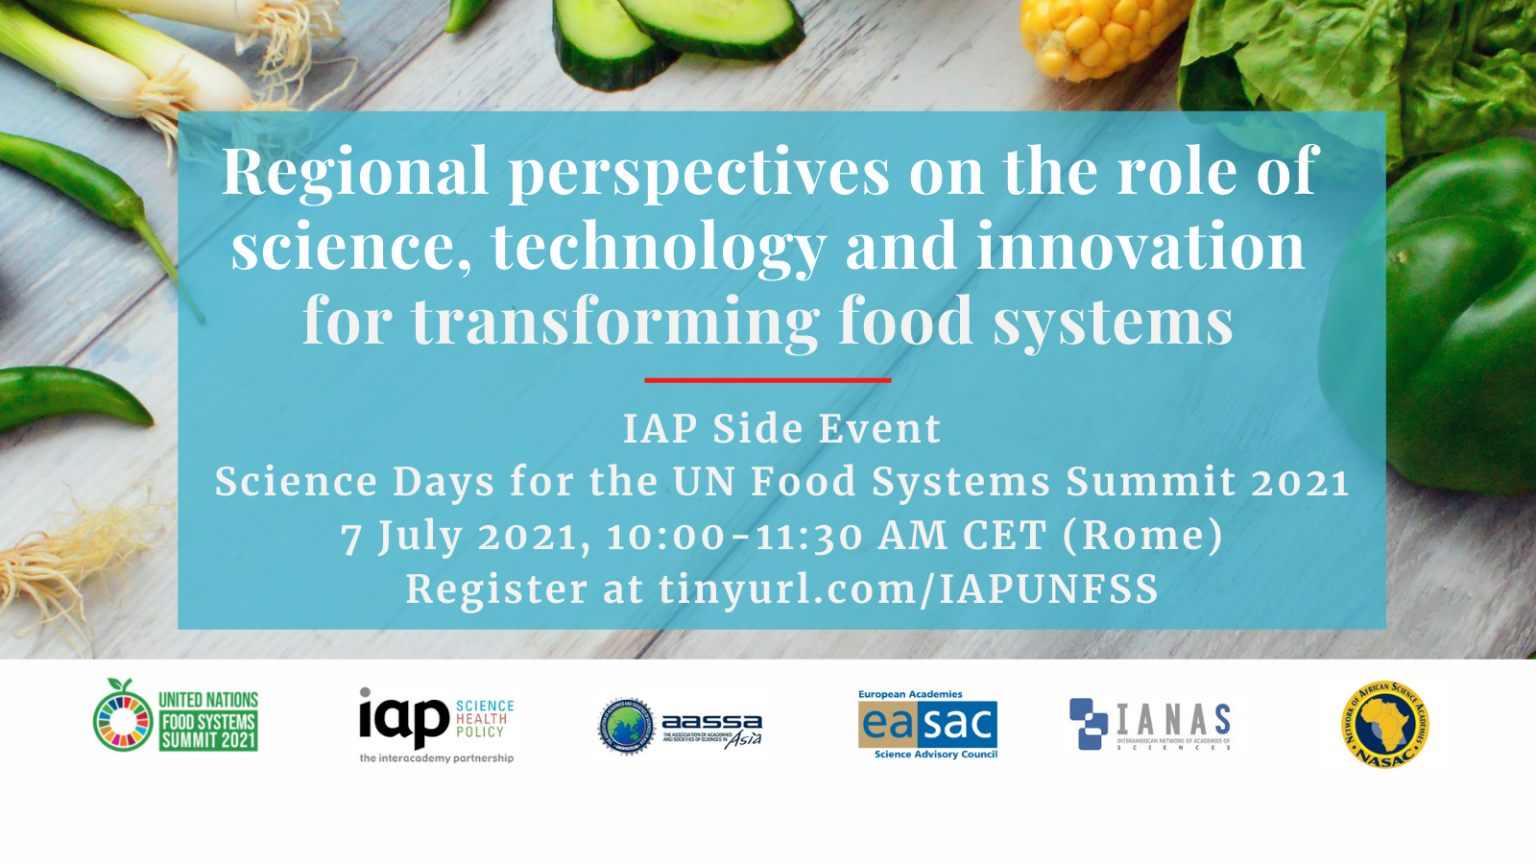 Regional perspectives on the role of science, technology and innovation for transforming food systems